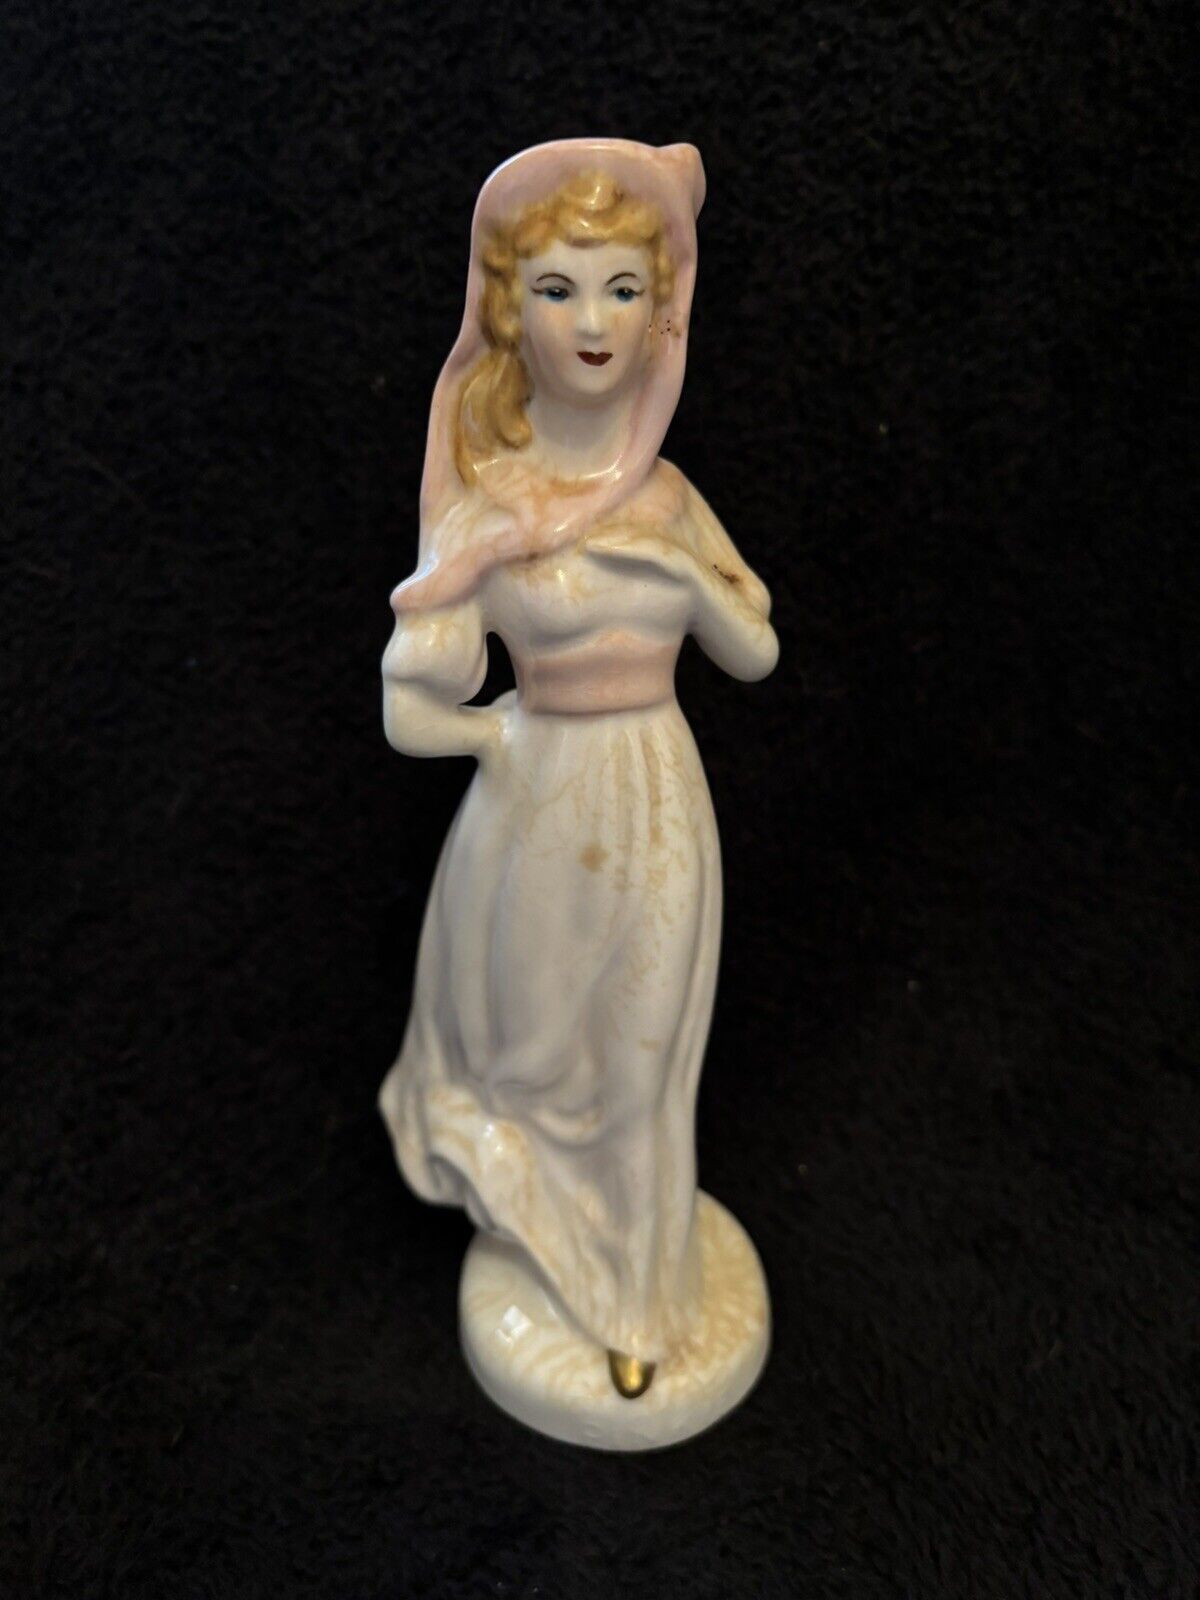 Vintage Beautiful Lady Pinkie Figurine Charming Hand Painted Porcelain 8” Height